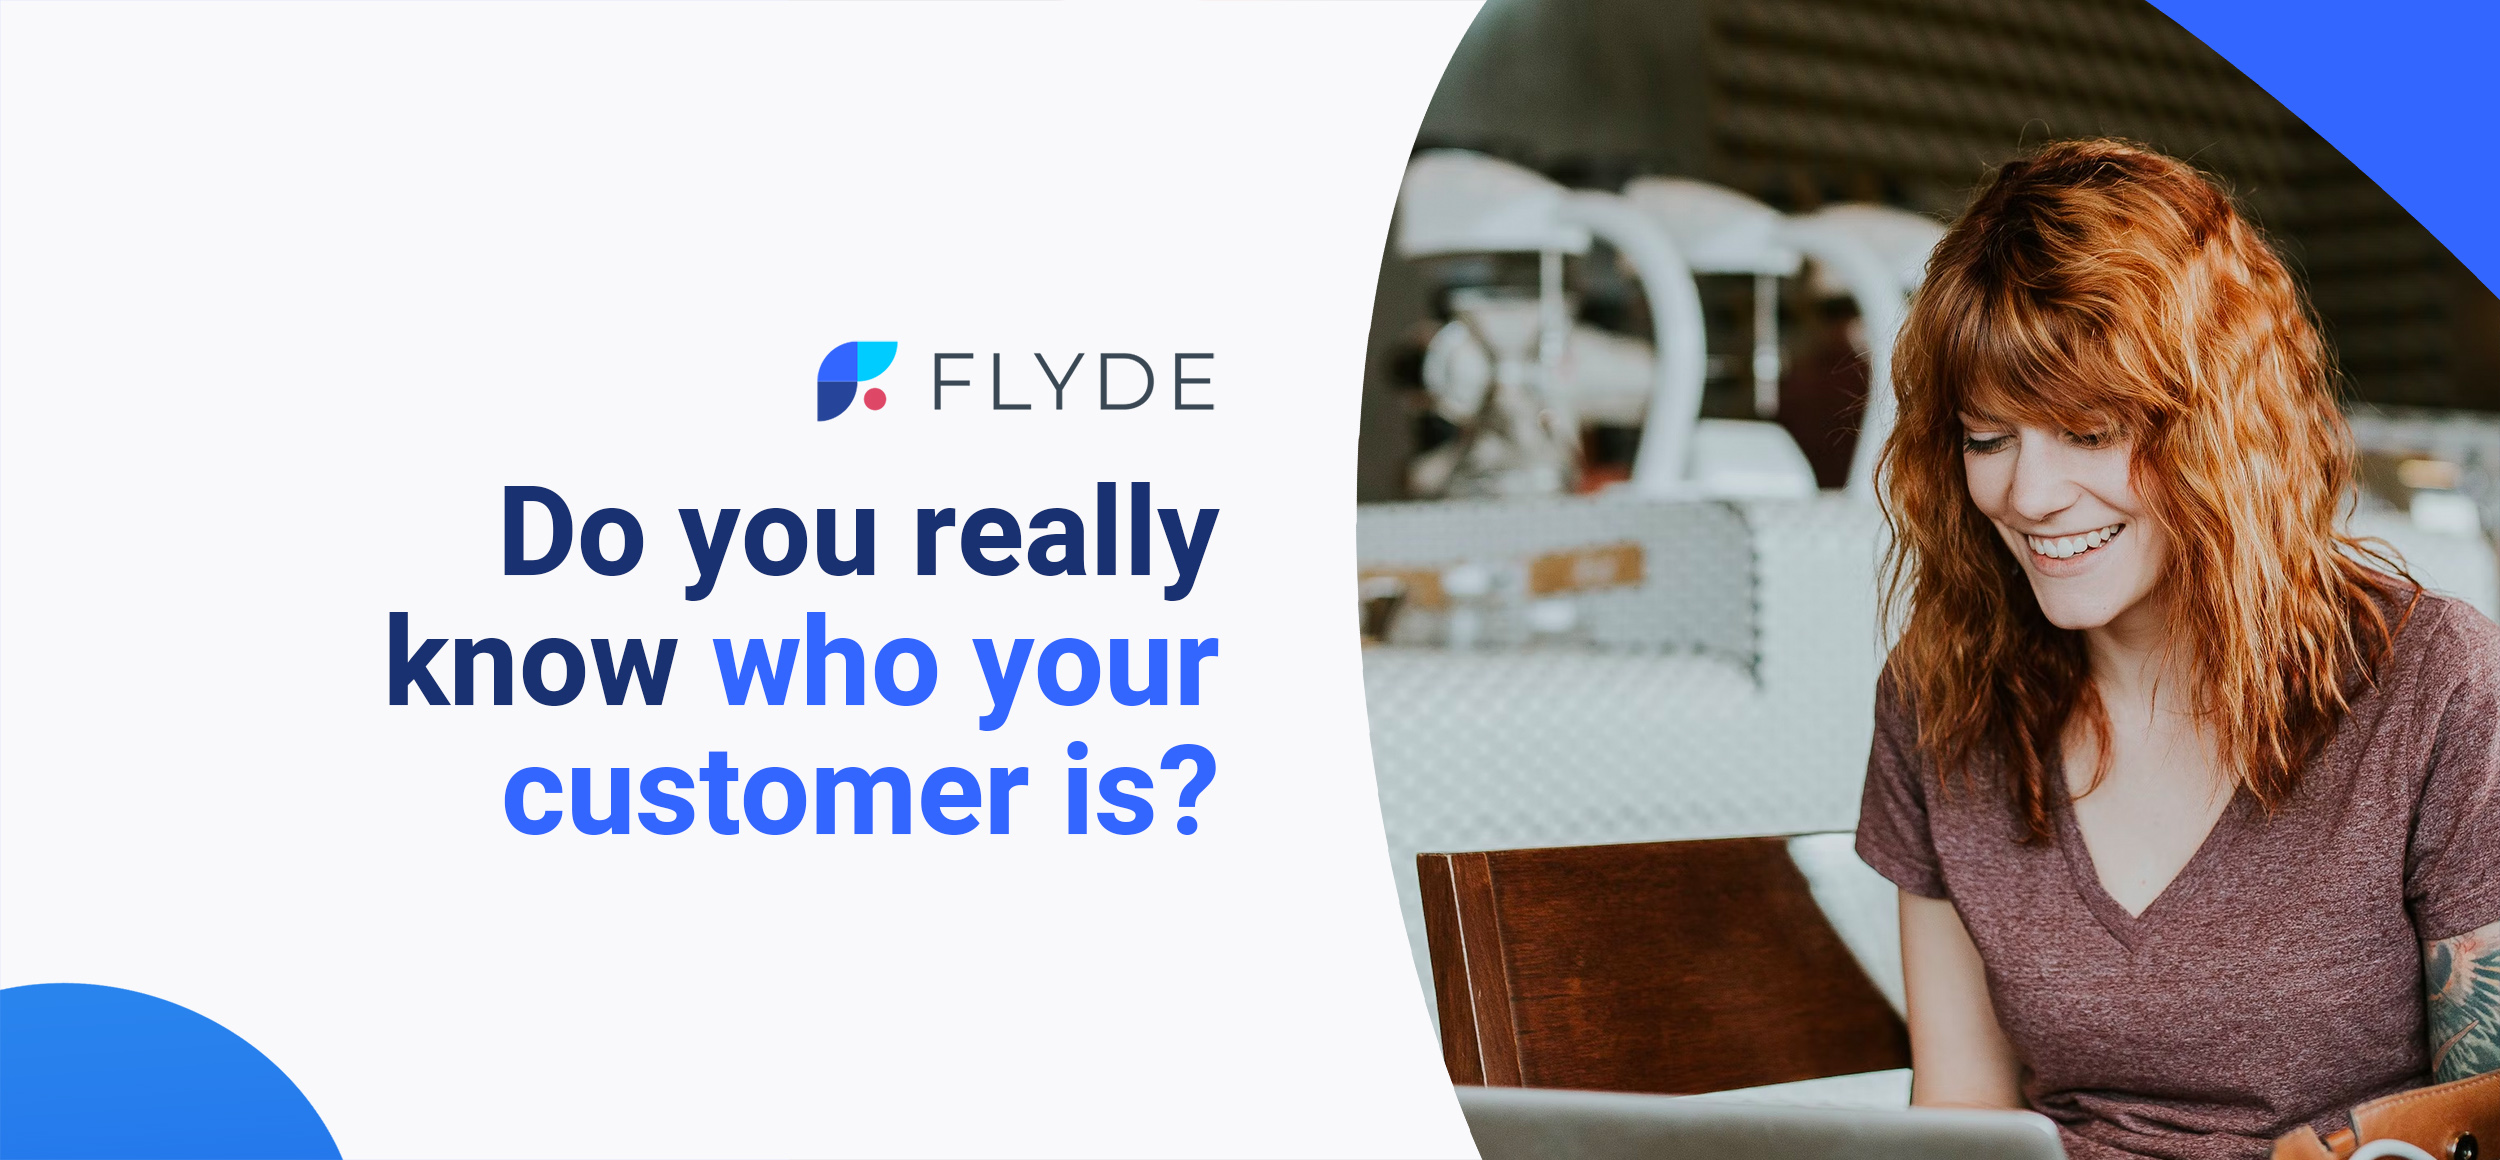 Do you really know who your customer is?